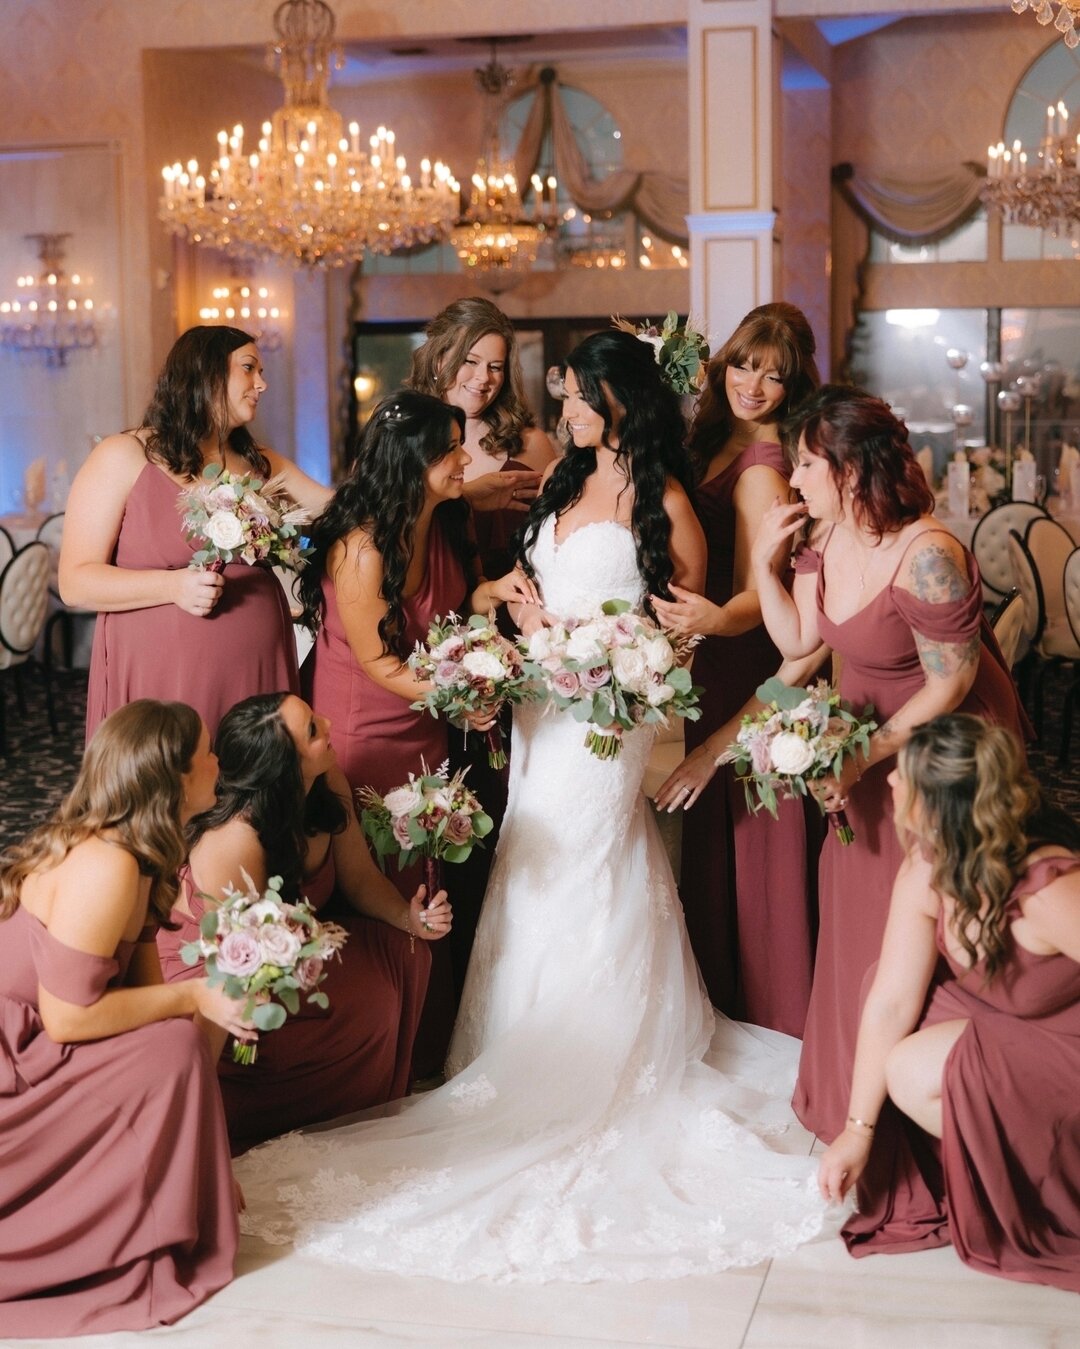 With a little help from my bridesmaids, I'm ready to take on the world. 💐✨

Bride: @jesslarosaa
Photographer: @josephgovphoto
Venue: @giorgiosbaitinghollow

Want to meet with a floral designer about your upcoming wedding day? To book a consultation 